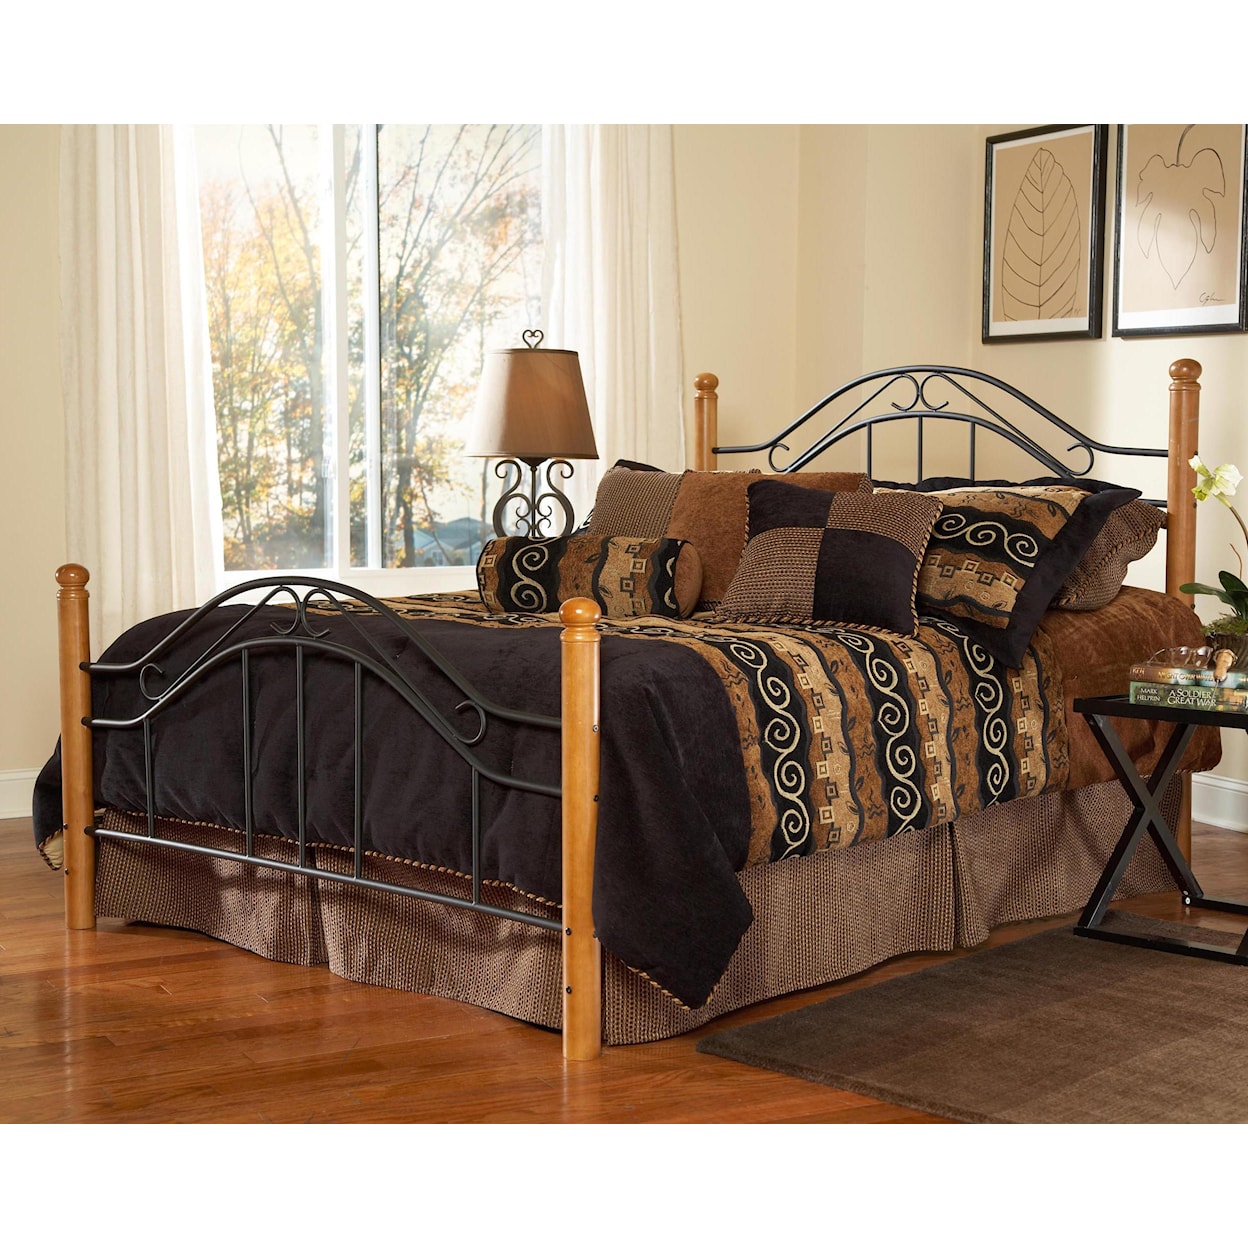 Hillsdale Wood Beds Full Winsloh Bed